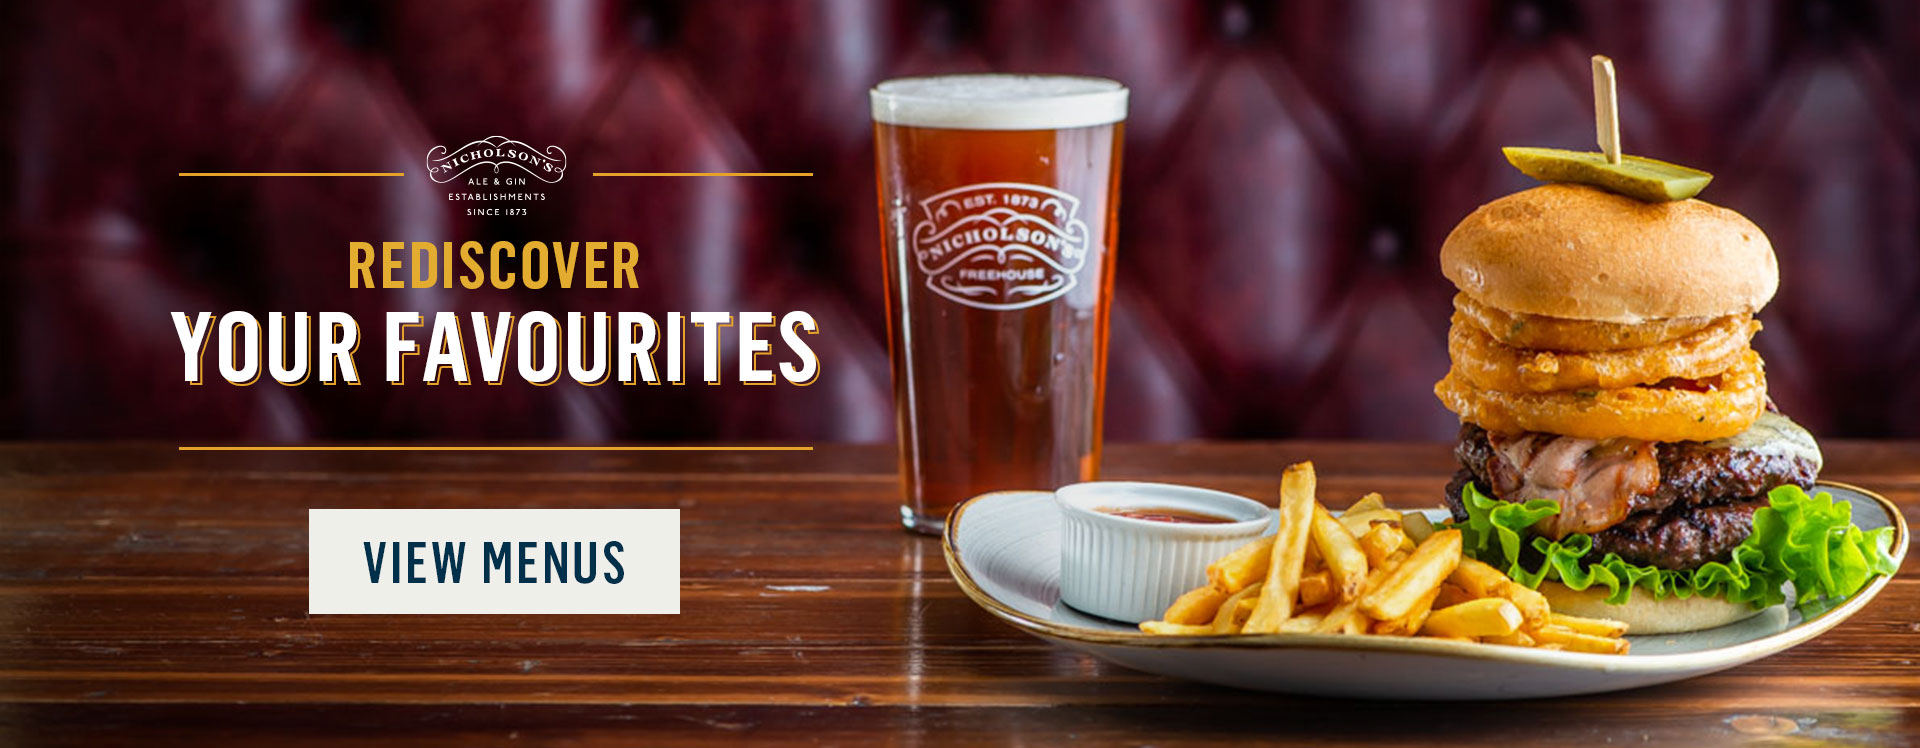 Rediscover your favourites at Deacon Brodies Tavern